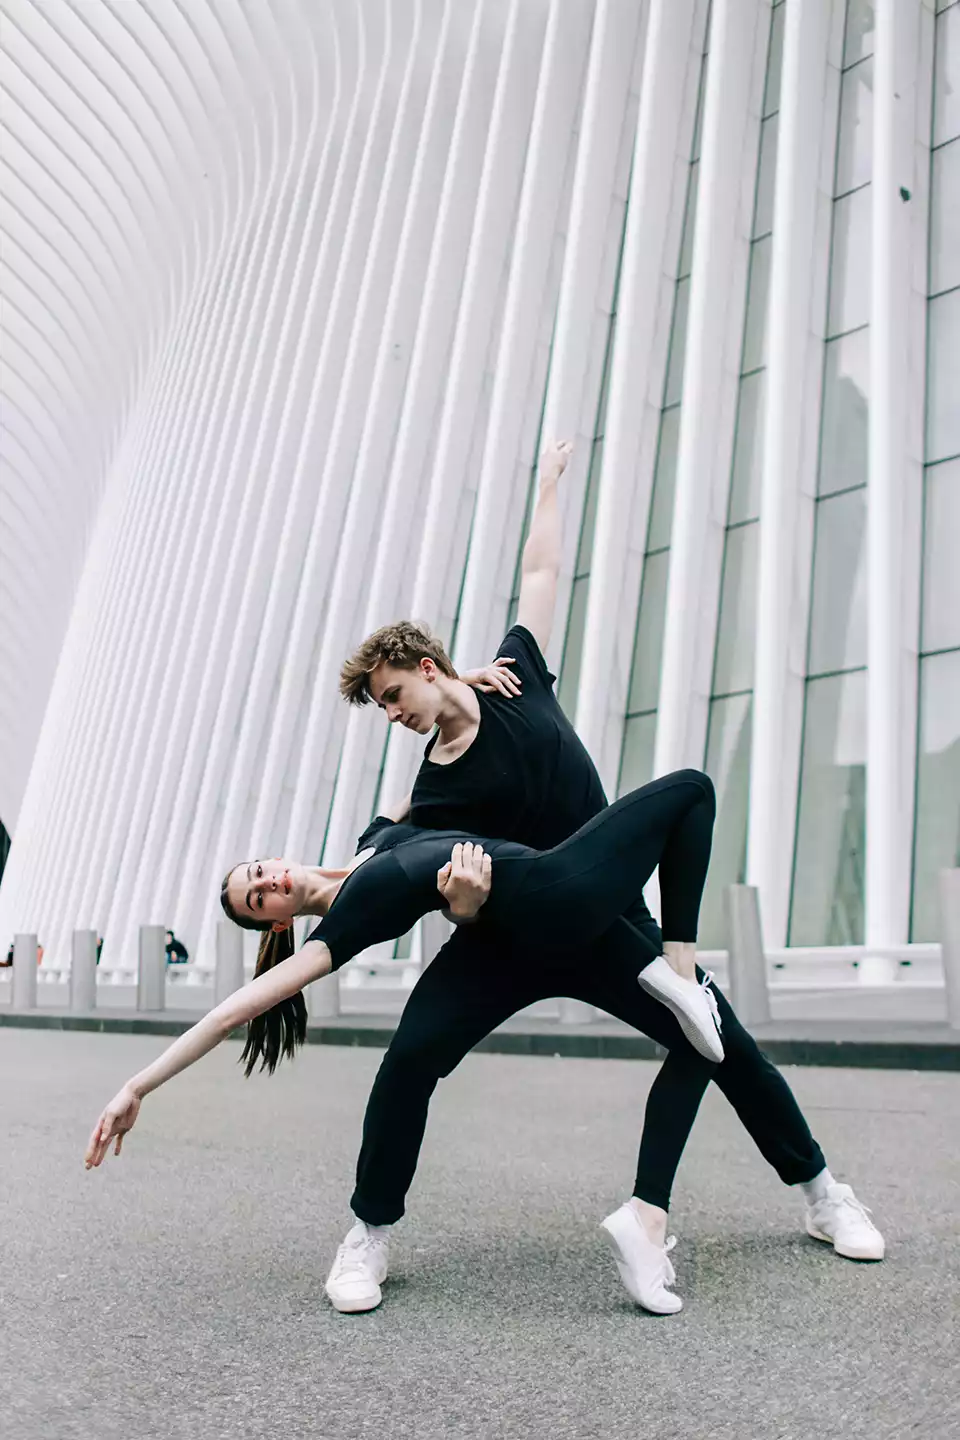 These two dancers showed style and grace, striking a pose in front of the stunning backdrop of downtown NYC's Oculus, at the World Trade Center.